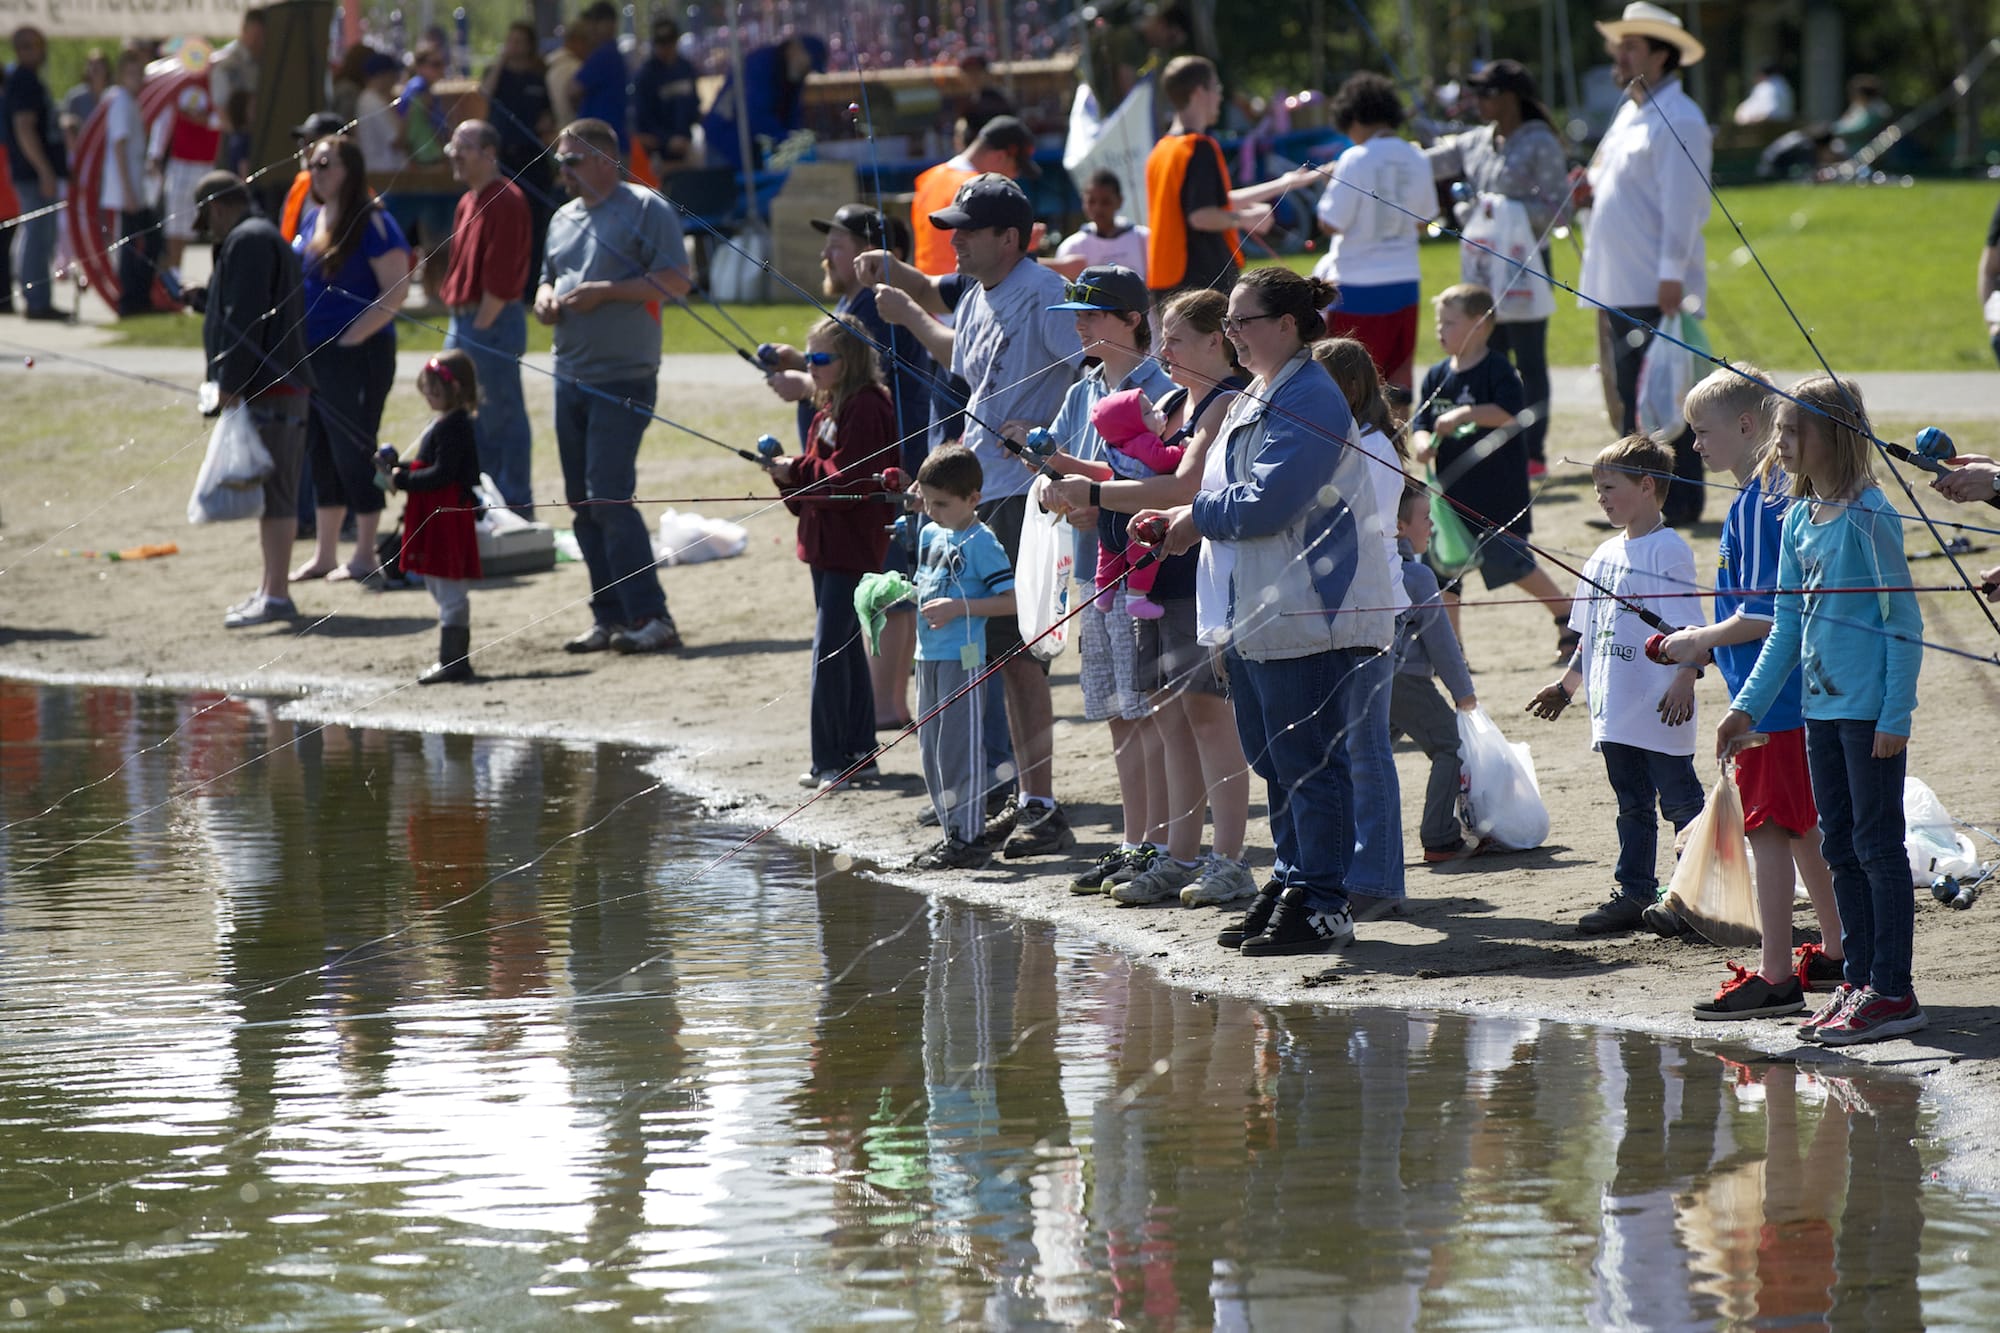 Photos by Steven Lane of The Columbian
Kids of all ages drop a line during the Klineline Kids Fishing Derby Saturday at Klineline Pond in Vancouver.